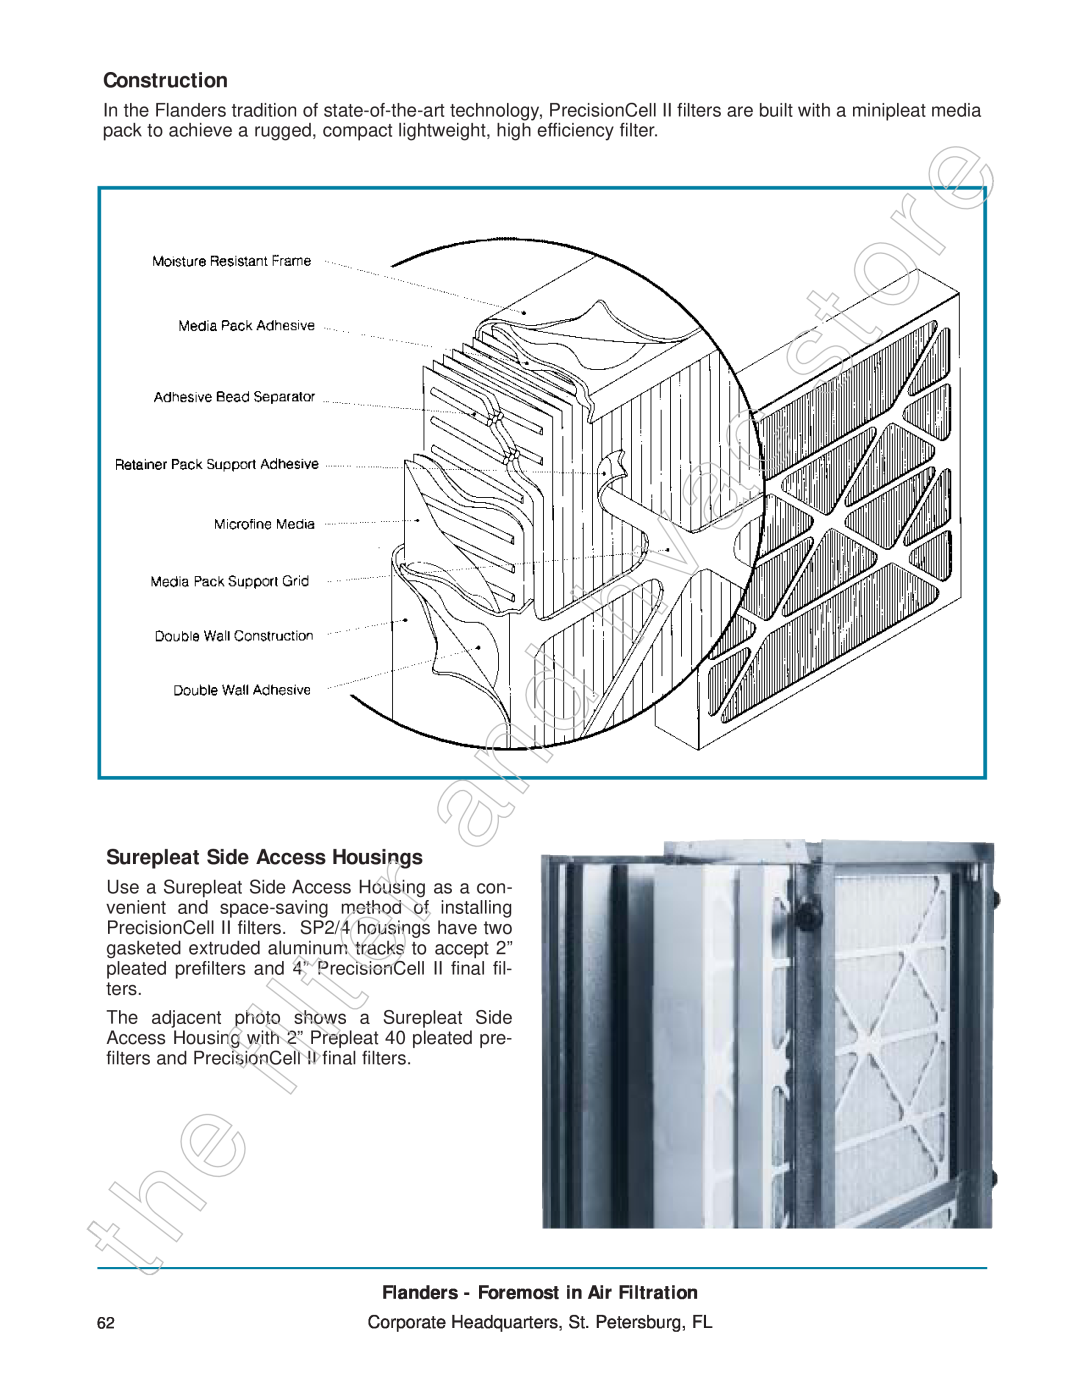 Honeywell 11255 manual Surepleat Side Access Housings, Construction, Flanders - Foremost in Air Filtration 